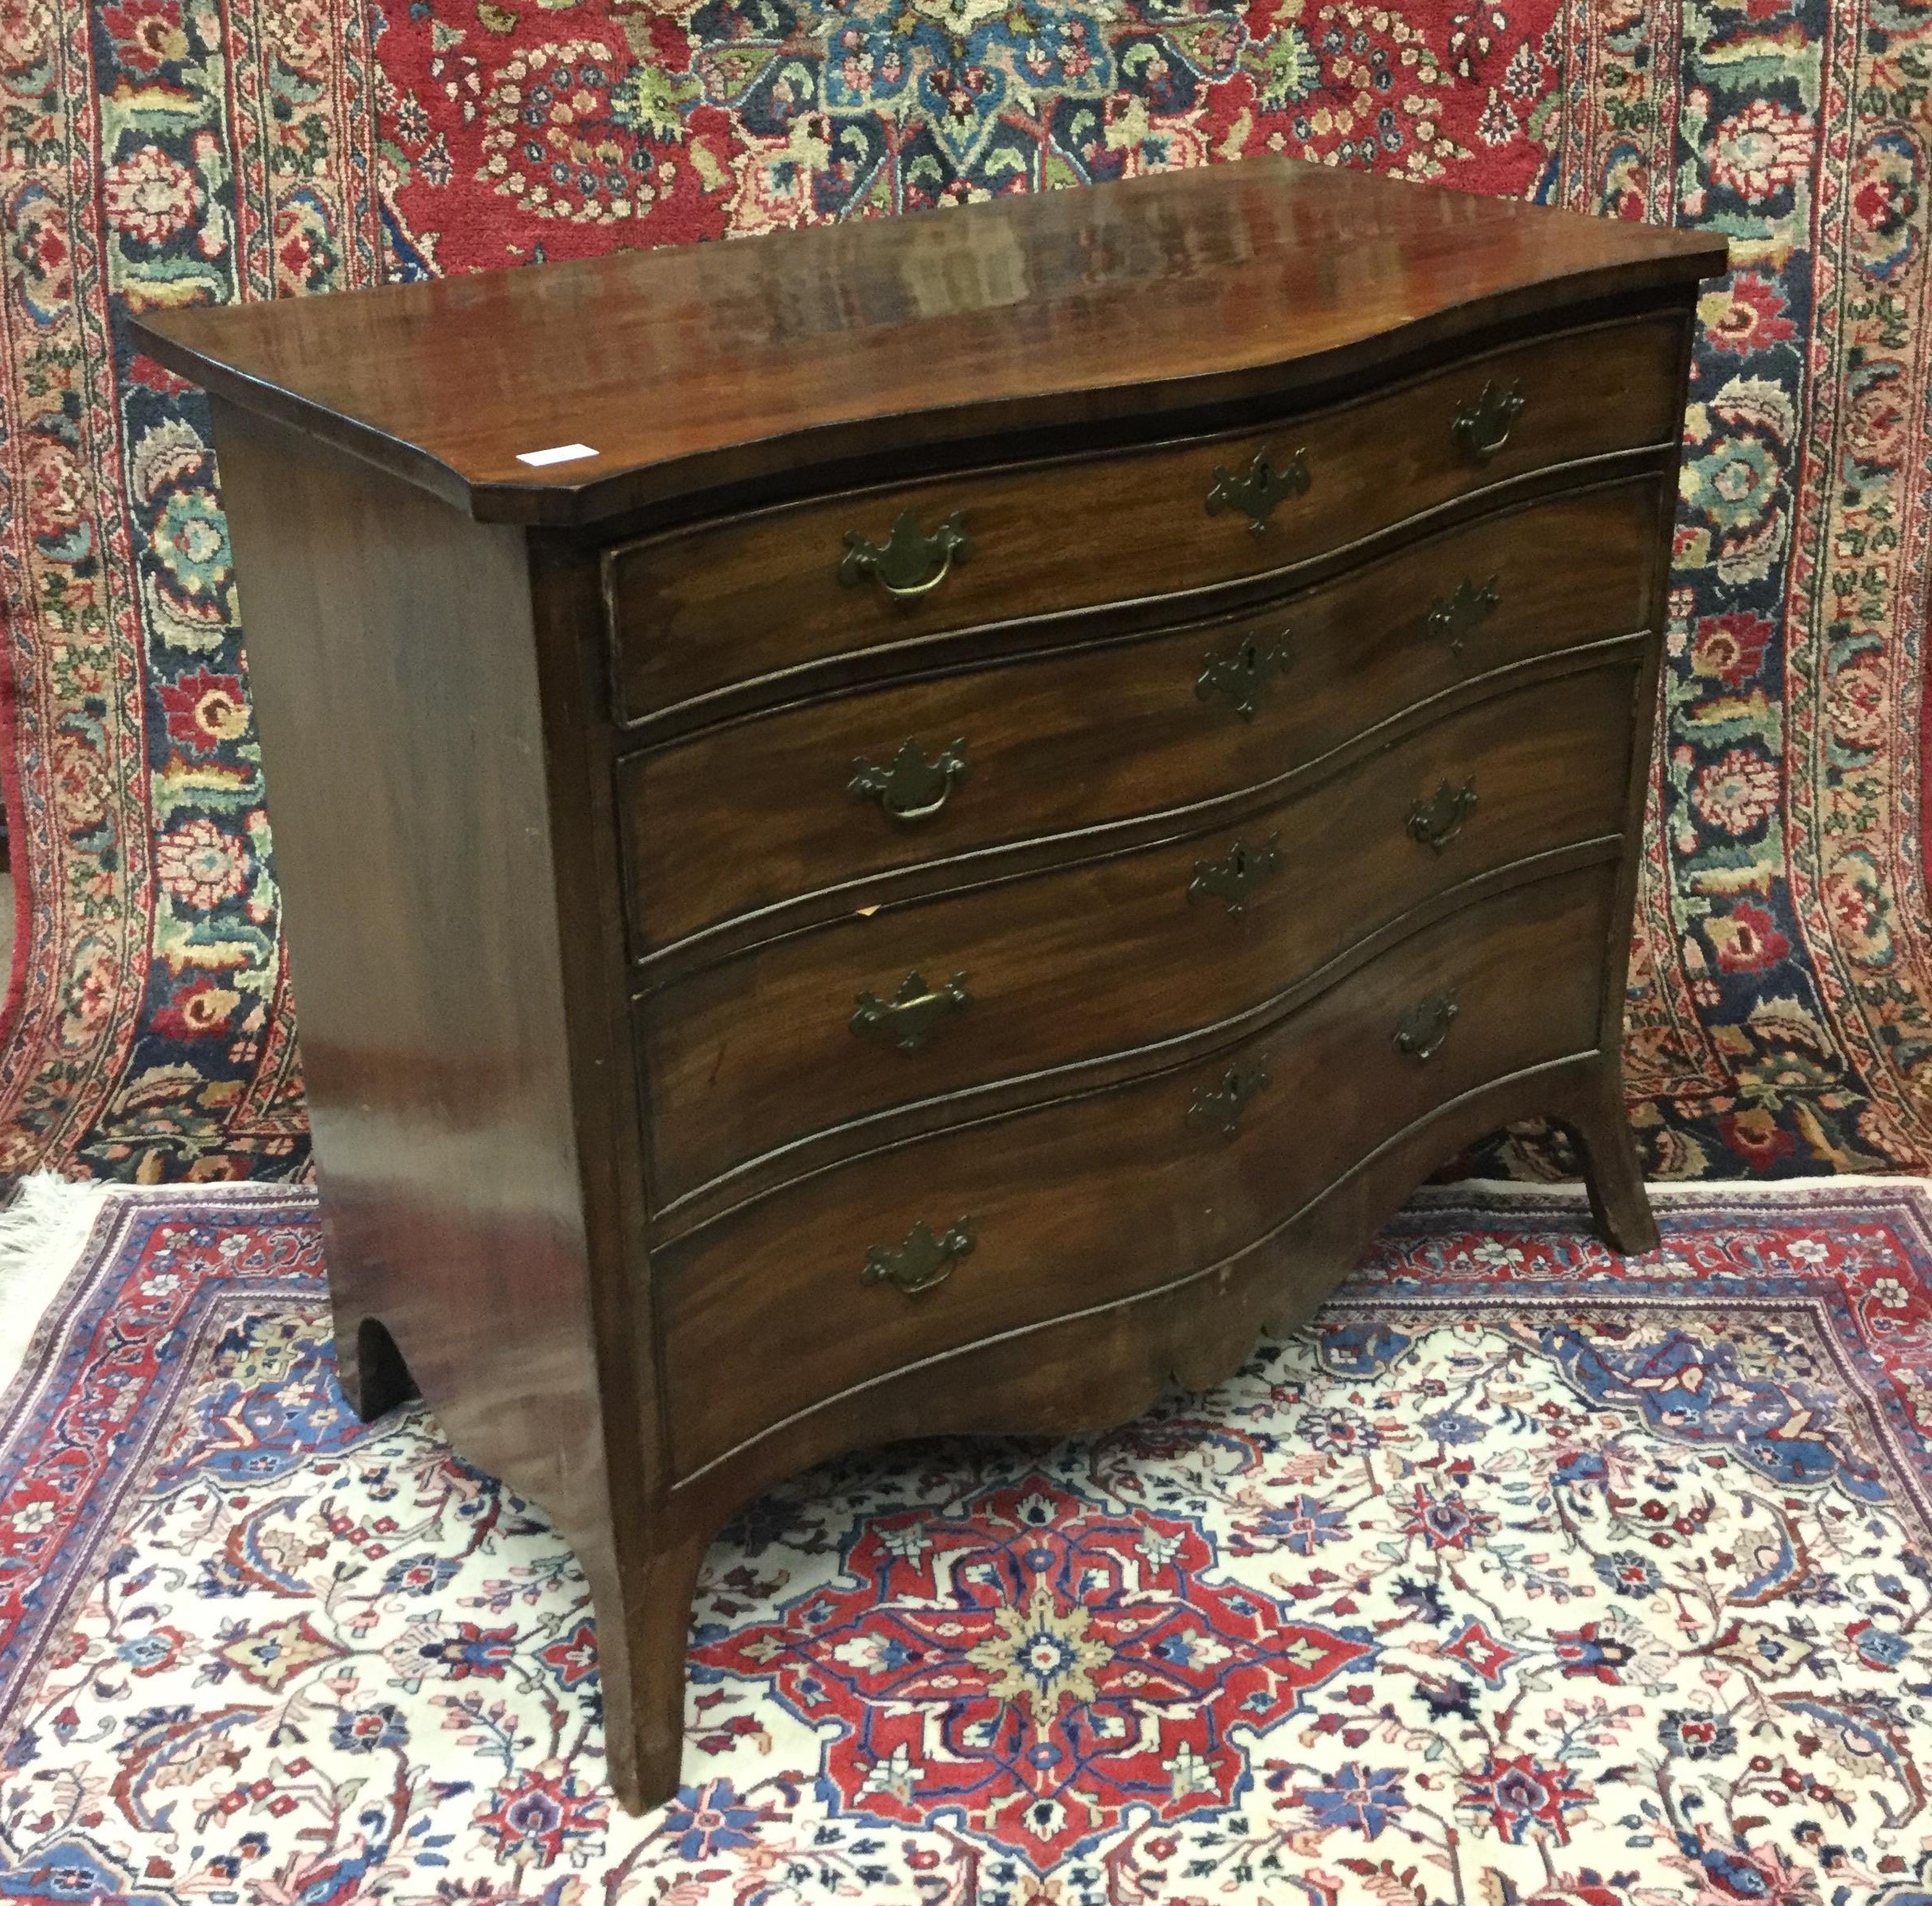 A MAHOGANY SERPENTINE CHEST OF DRAWERS